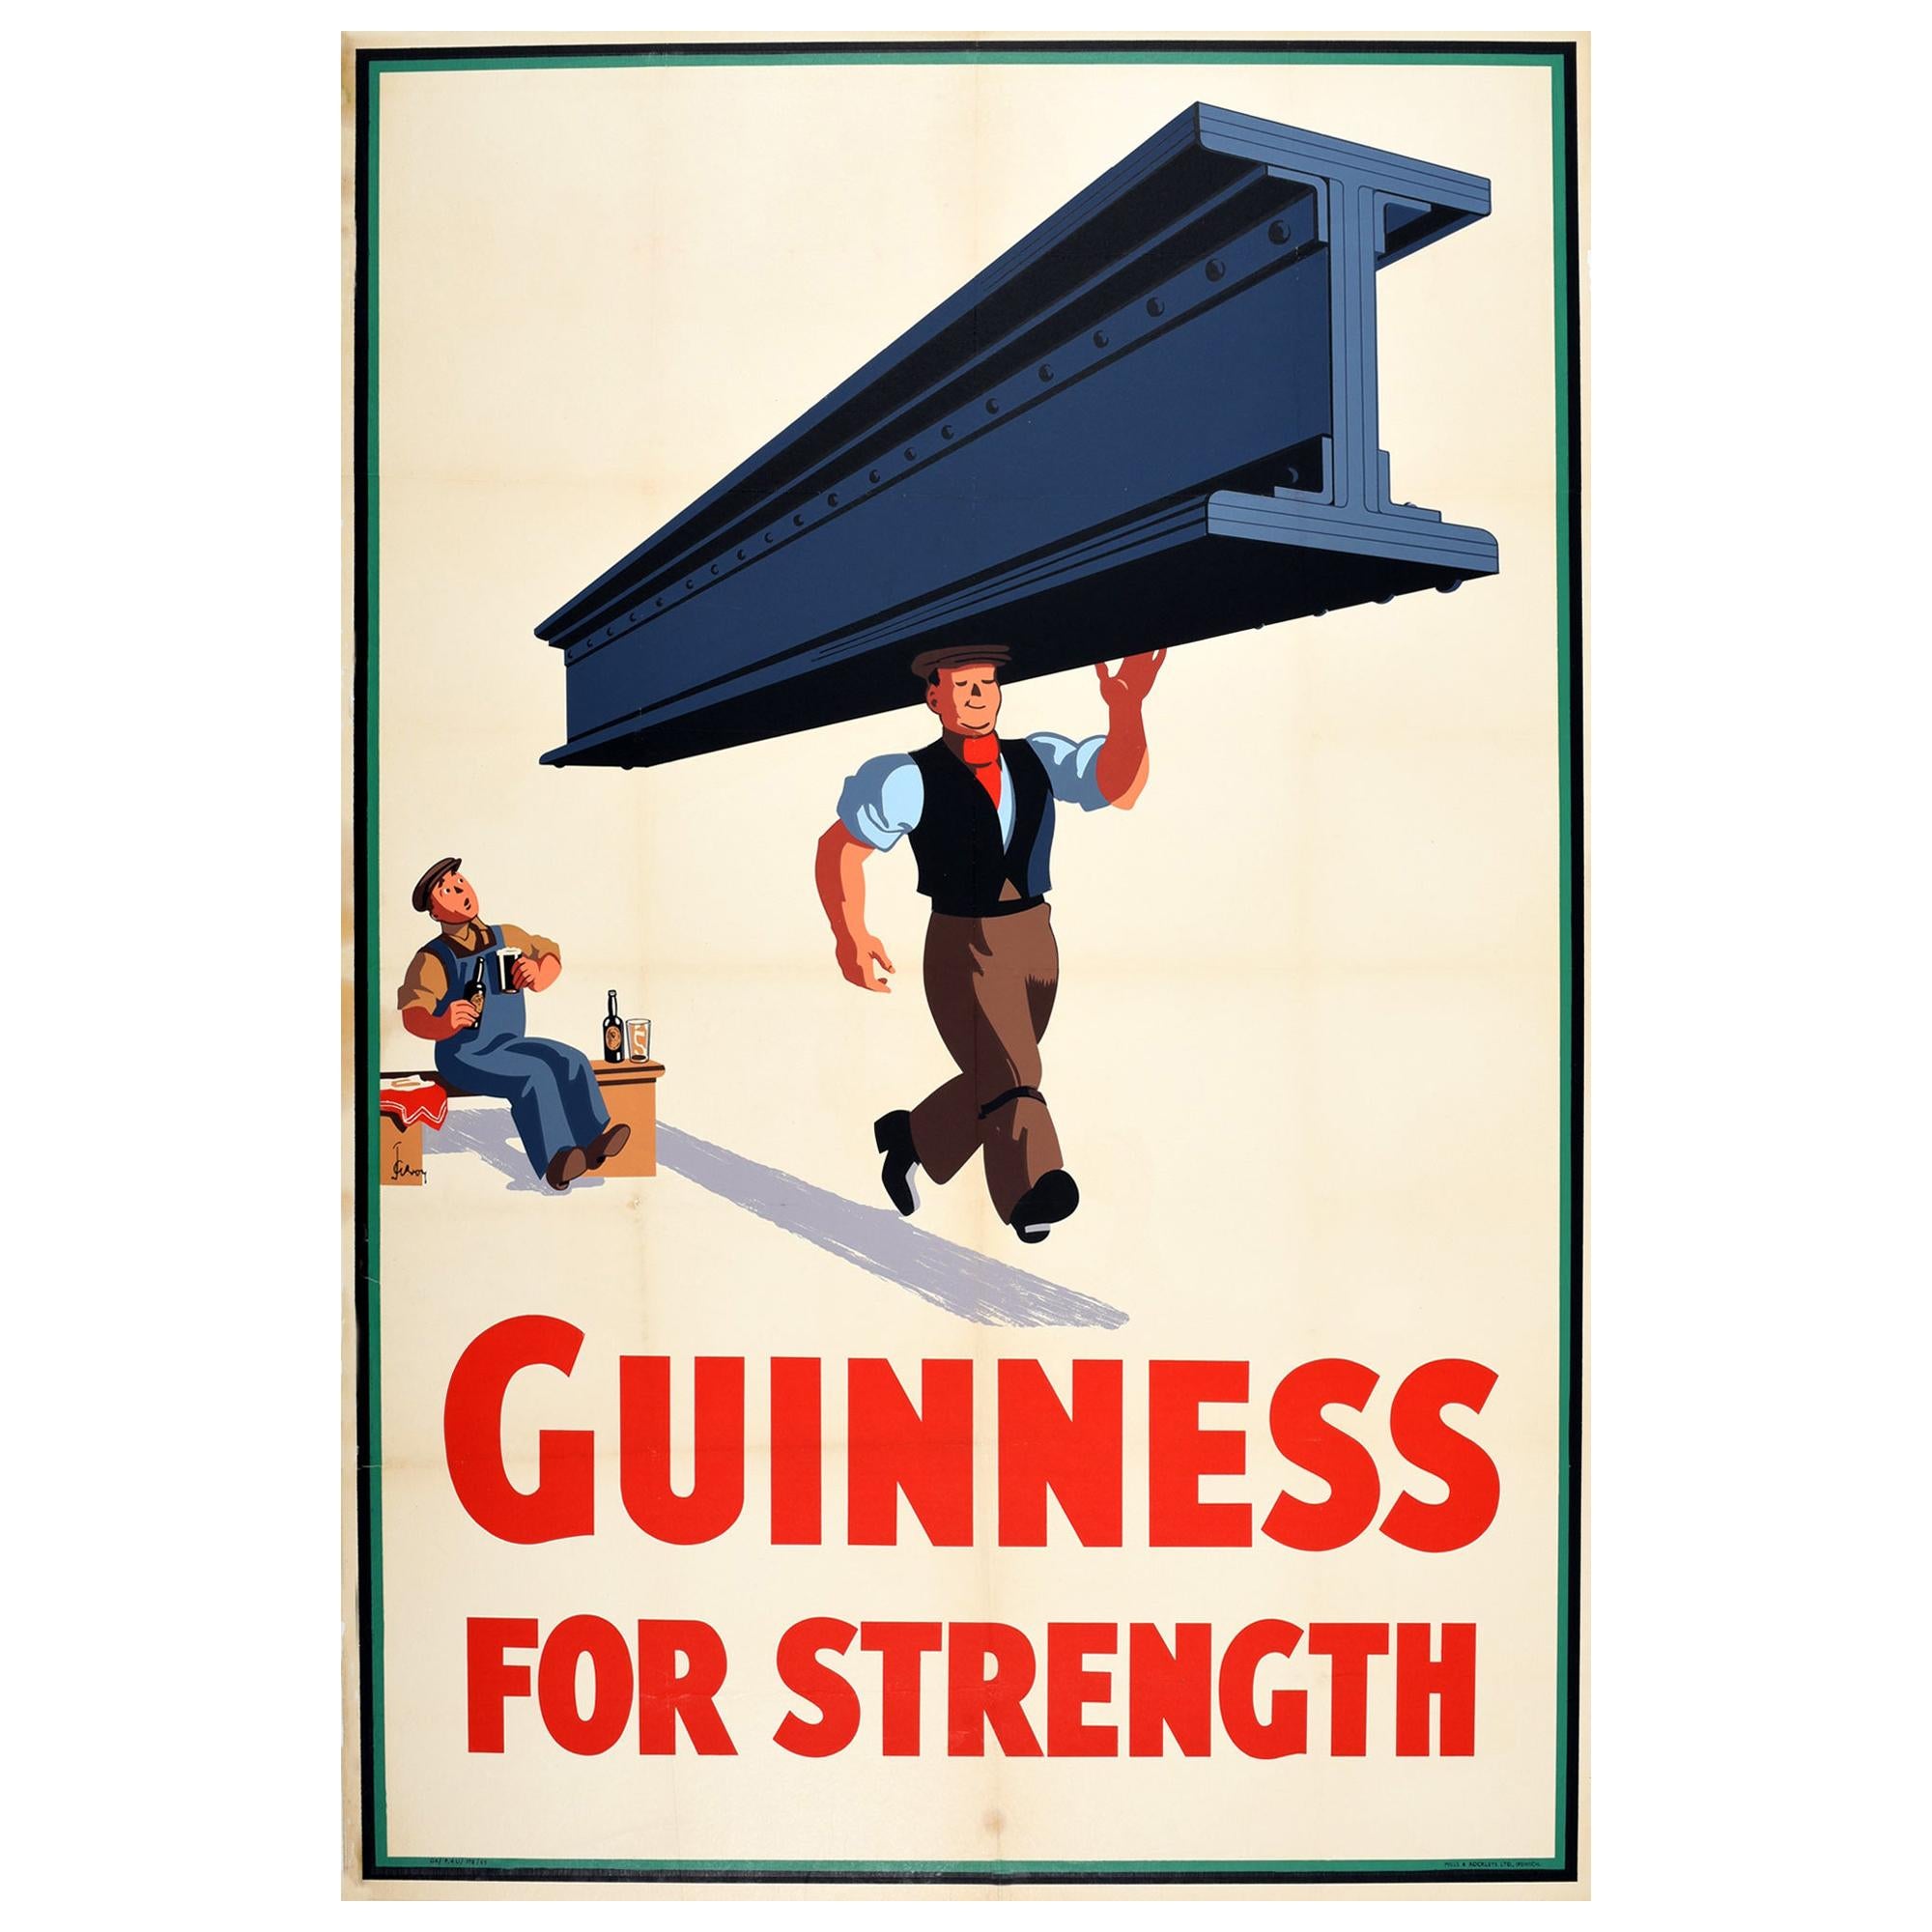 Original Vintage Guinness For Strength Poster by J Gilroy Irish Stout Beer Drink